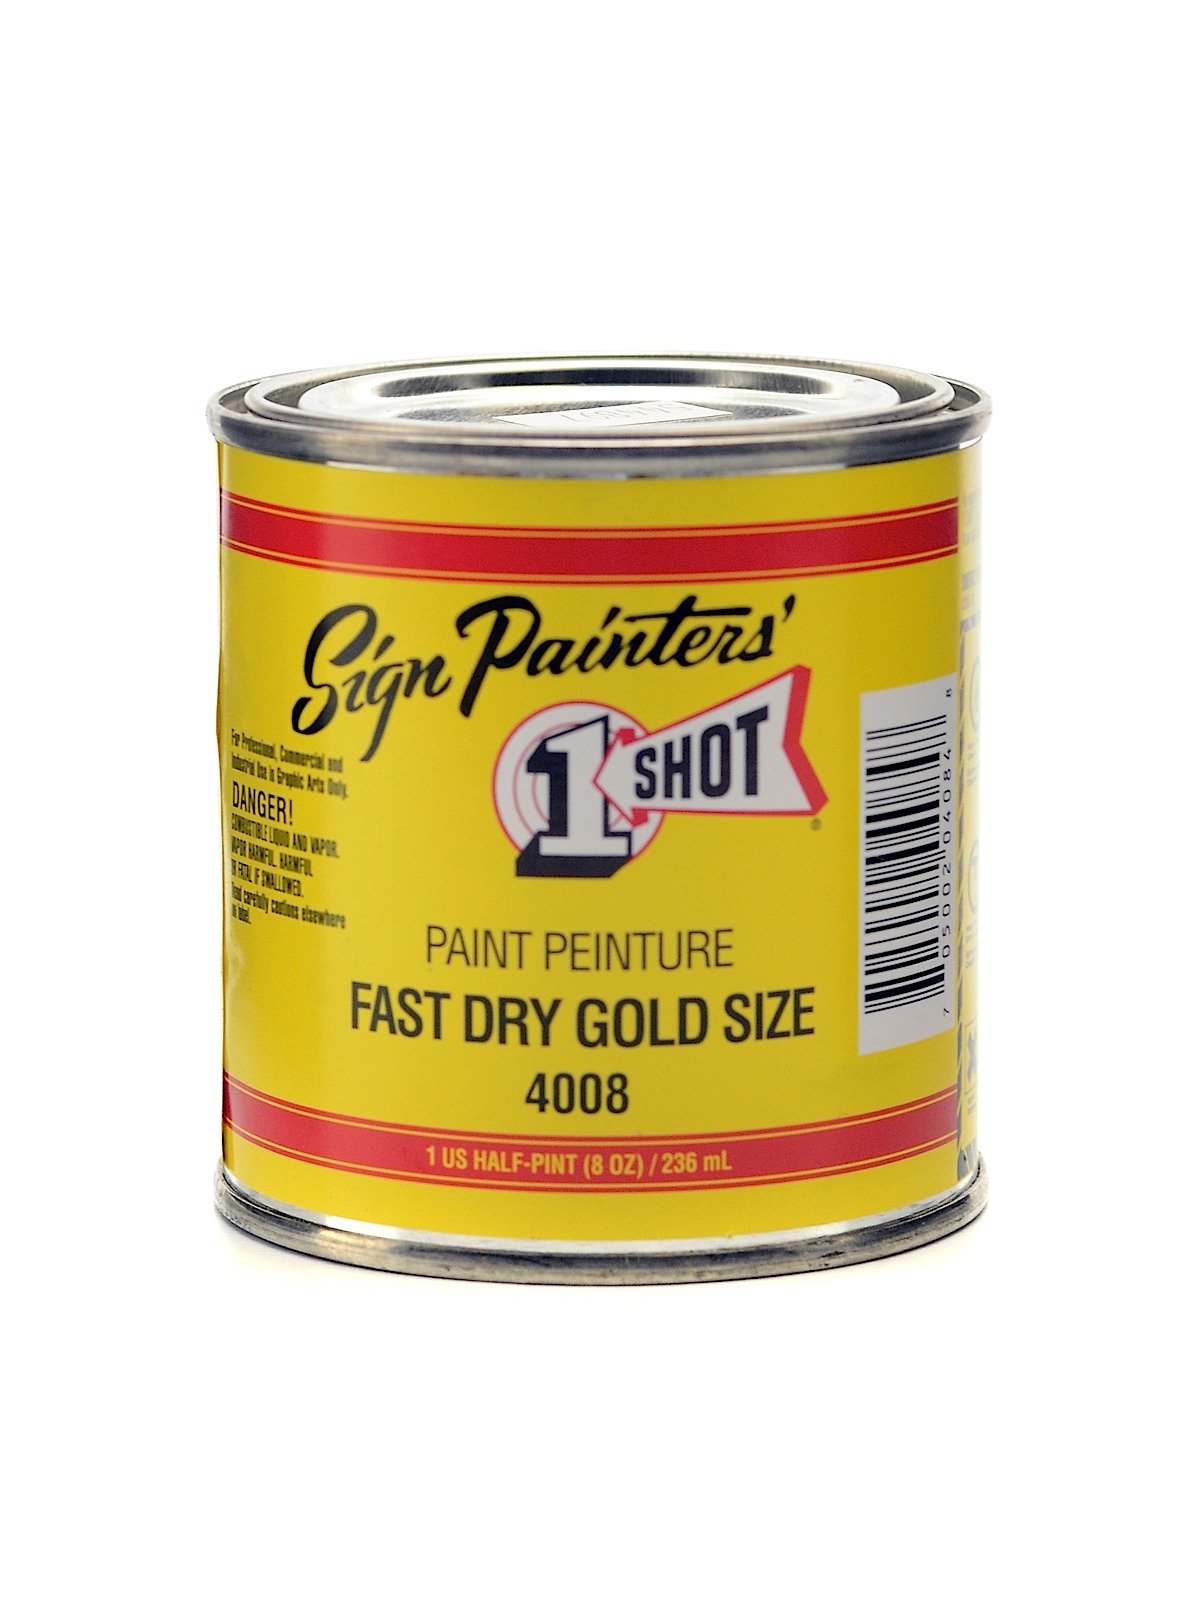 1-Shot - Fast Dry Gold Size